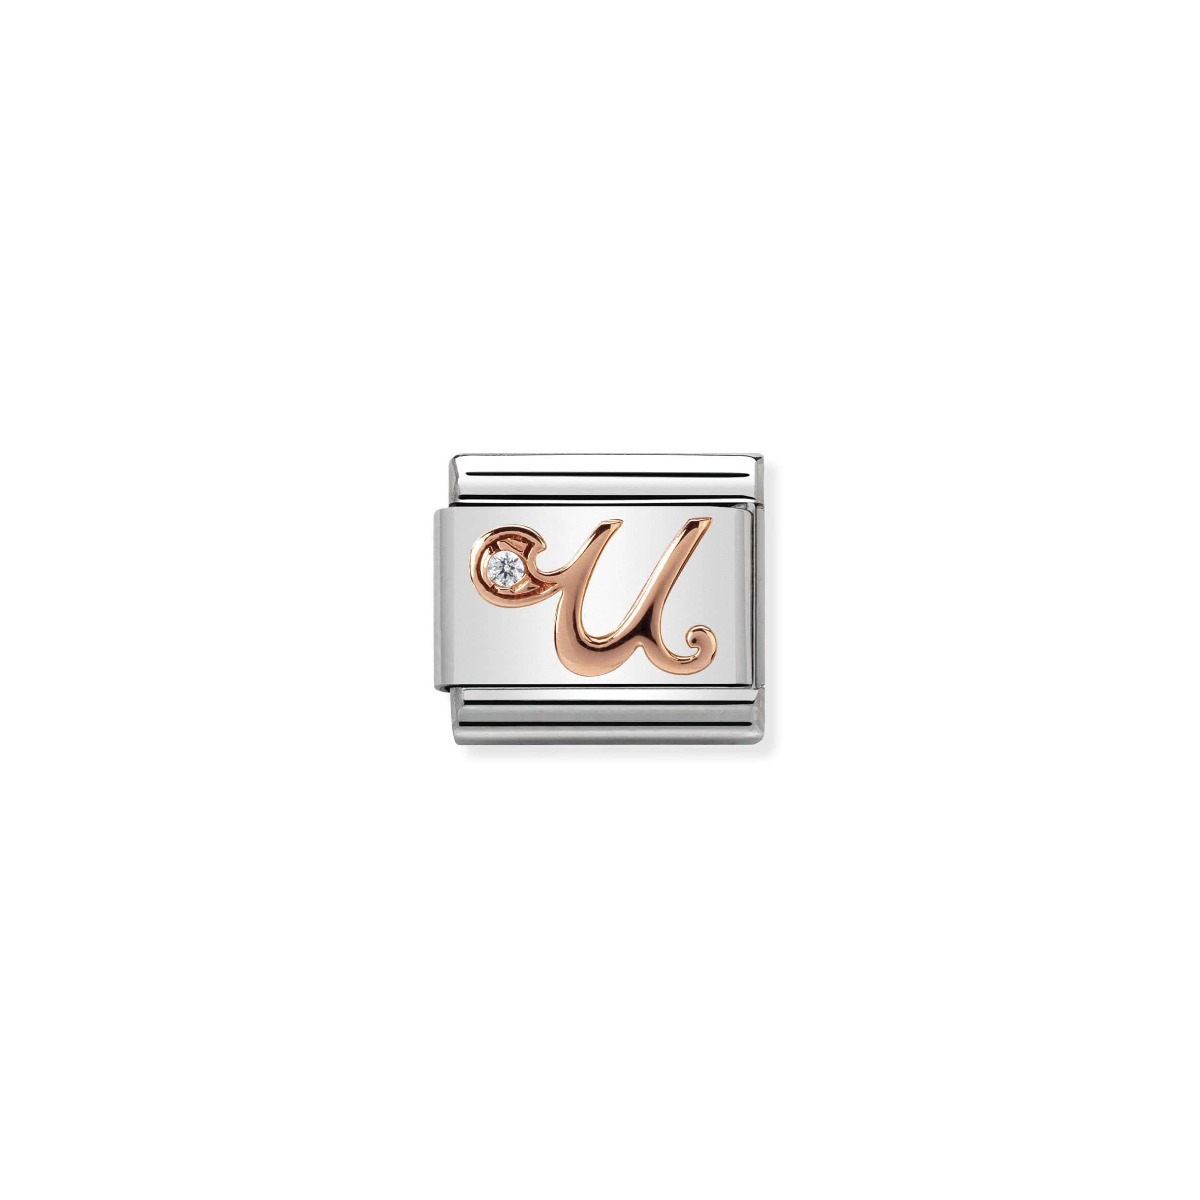 Nomination Rose Gold and Zirconia Classic Letter Charm - U